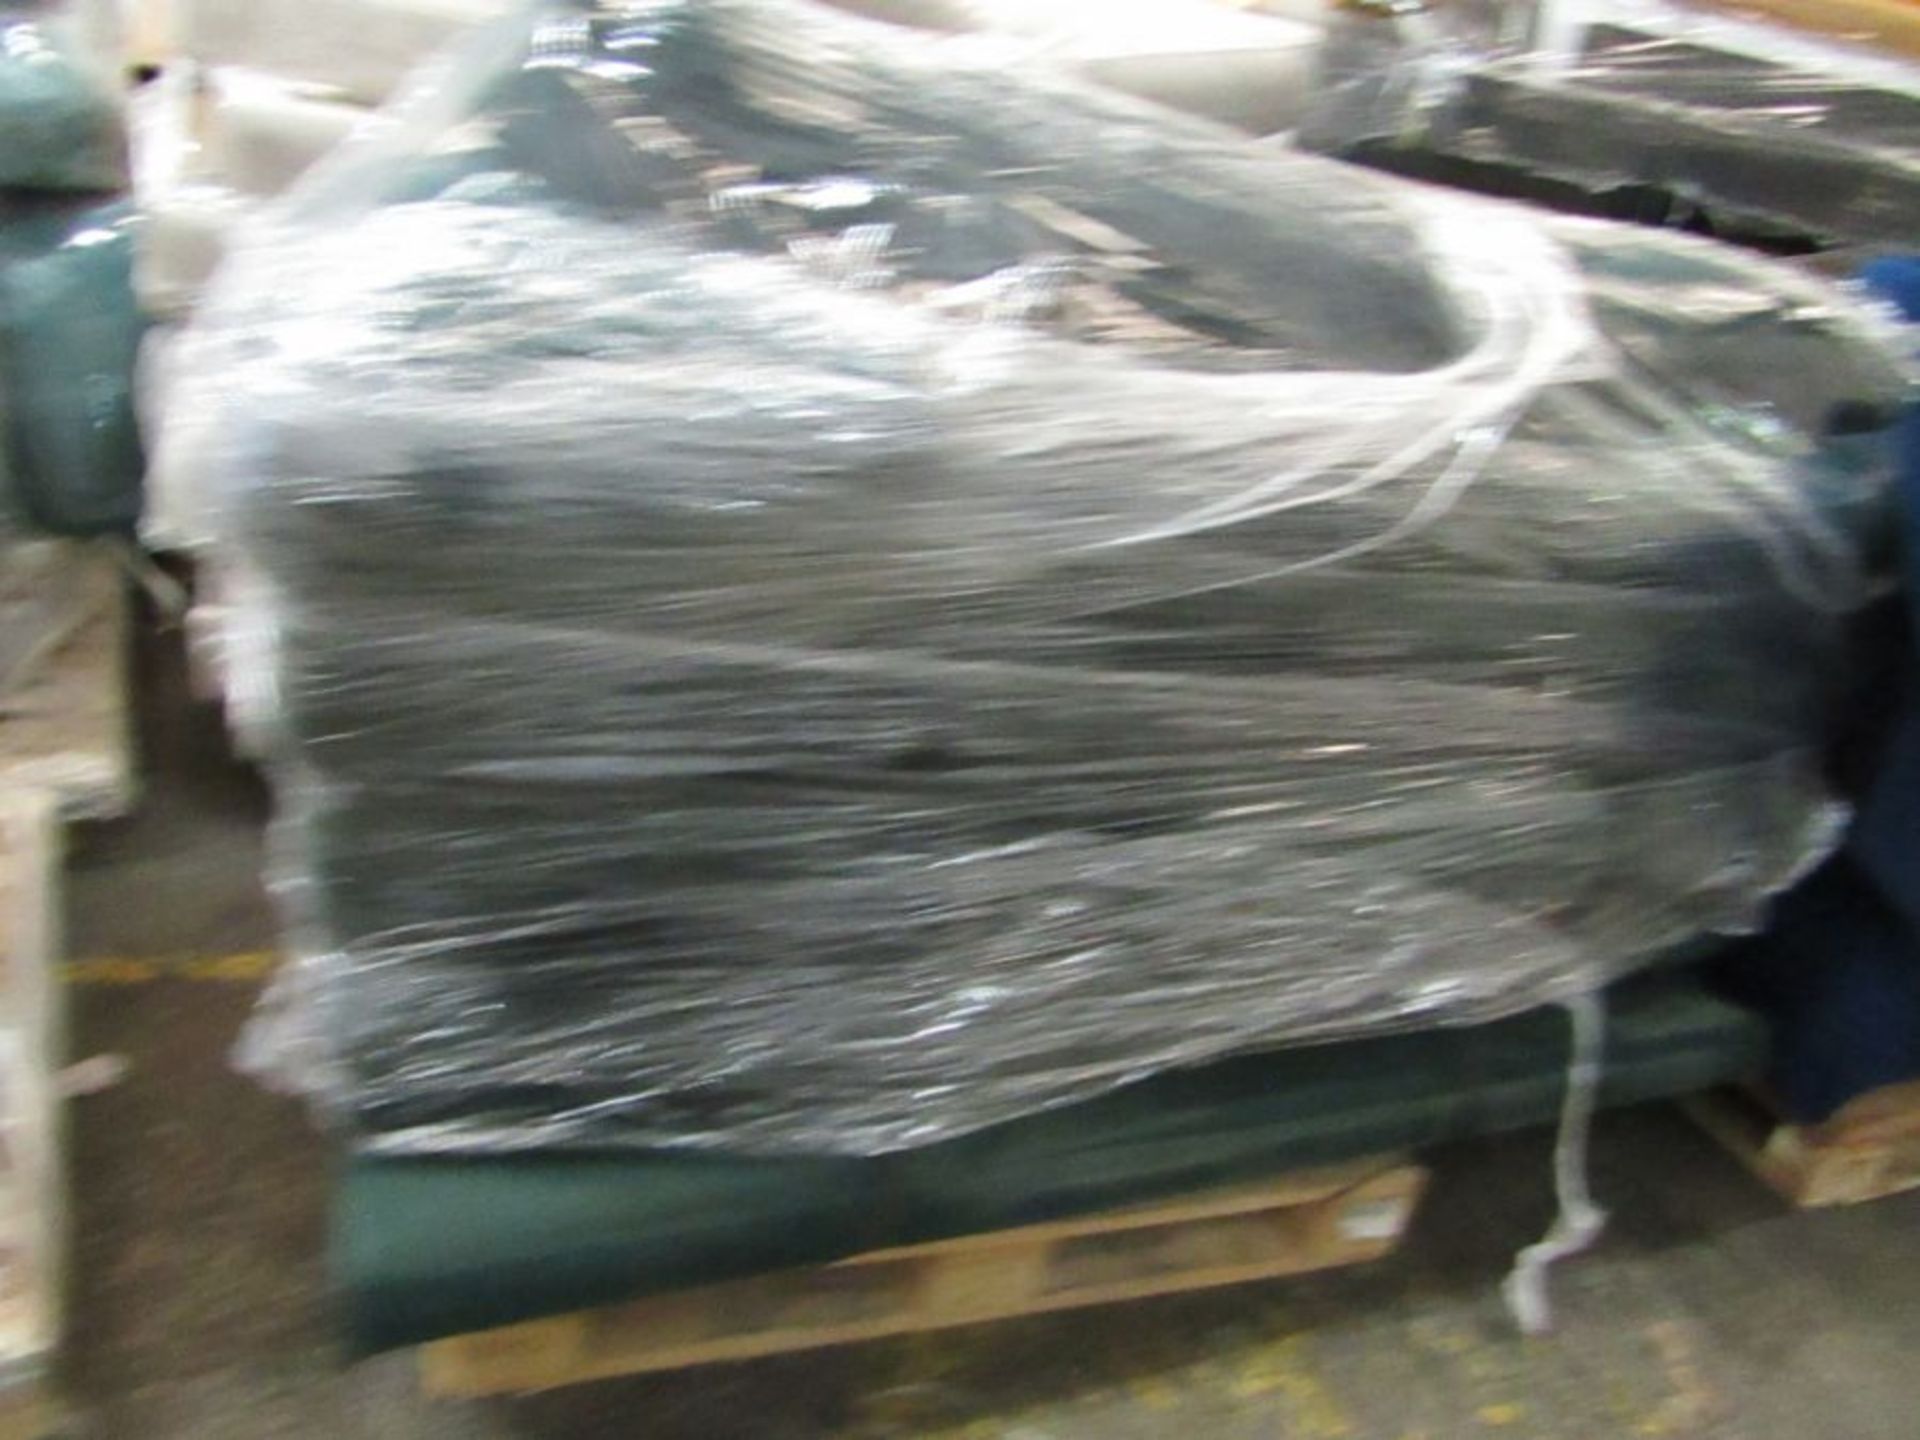 0% Buyers Premium, 24 Pallets of Genuine SNUG SOFA parts - Mixed Lots of Bases Backs Arms Cushions - Image 3 of 16